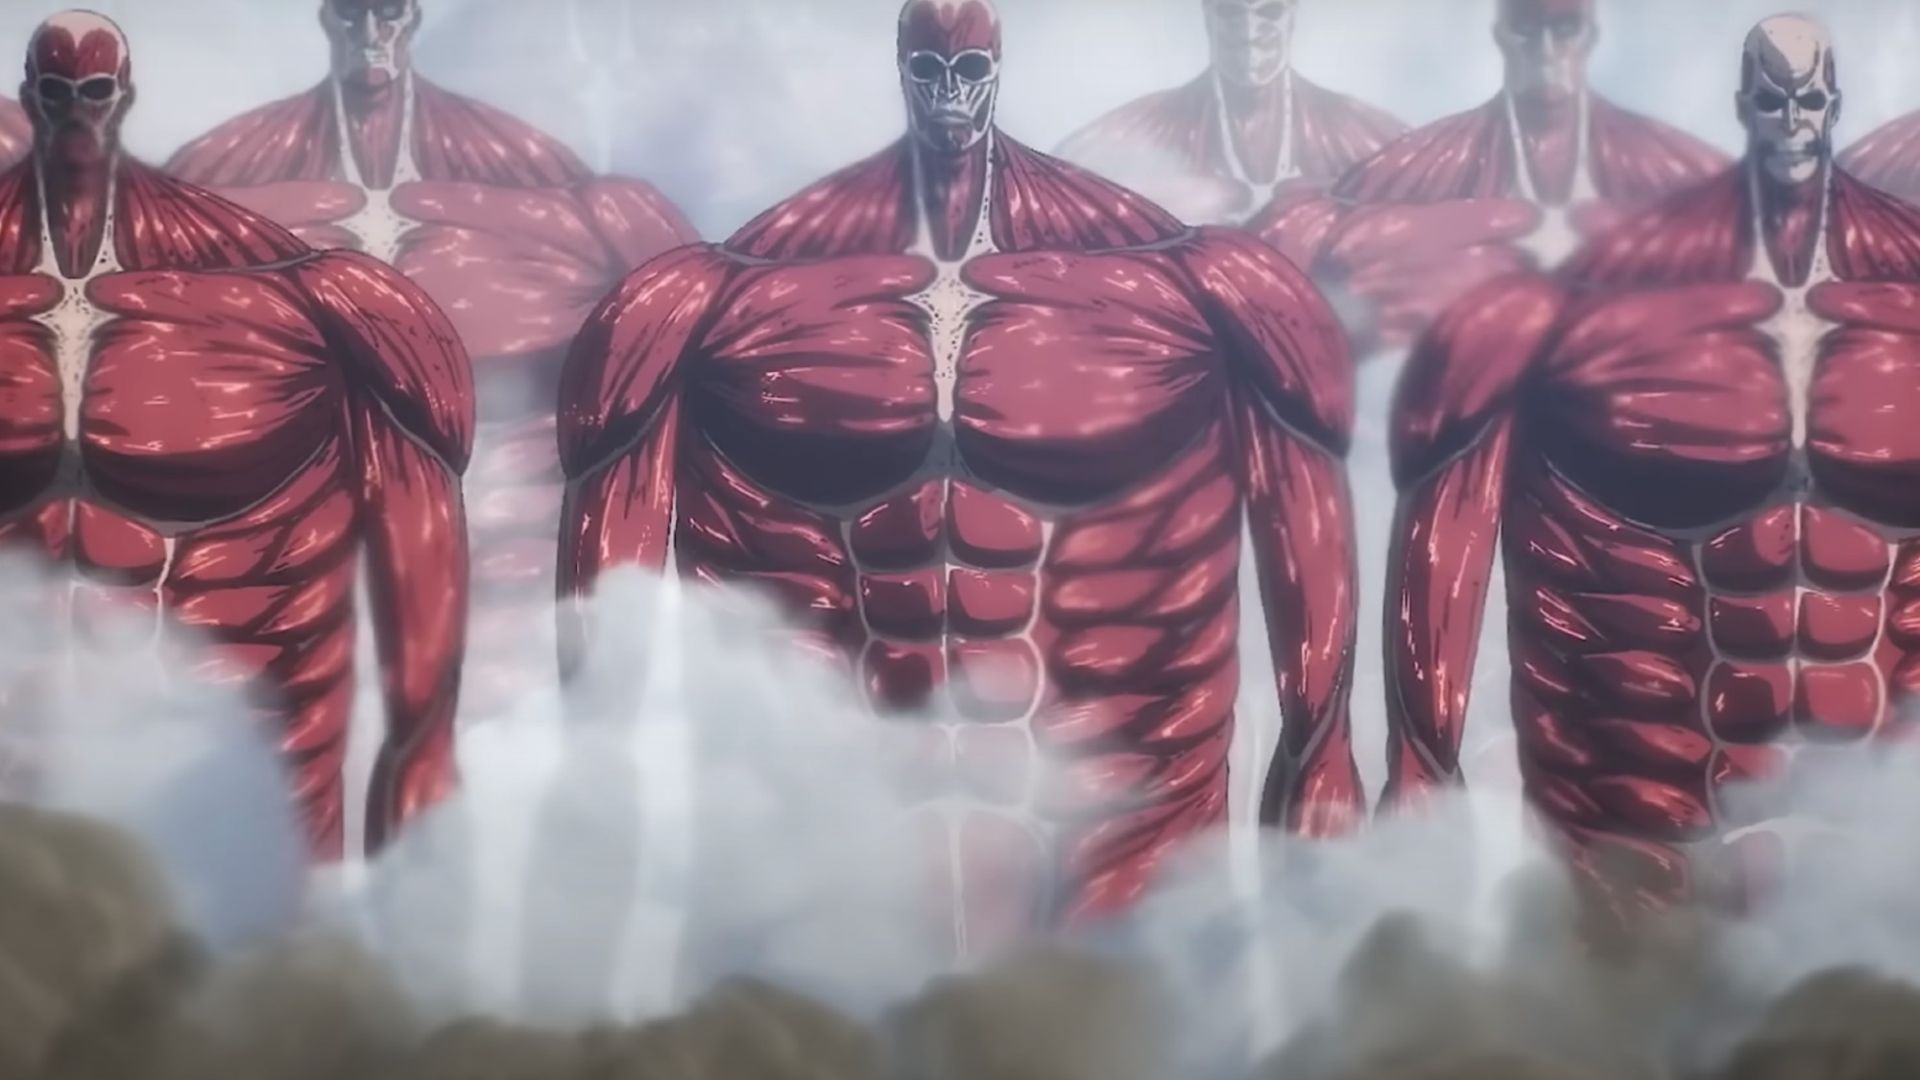 Attack on Titan and the Rumbling